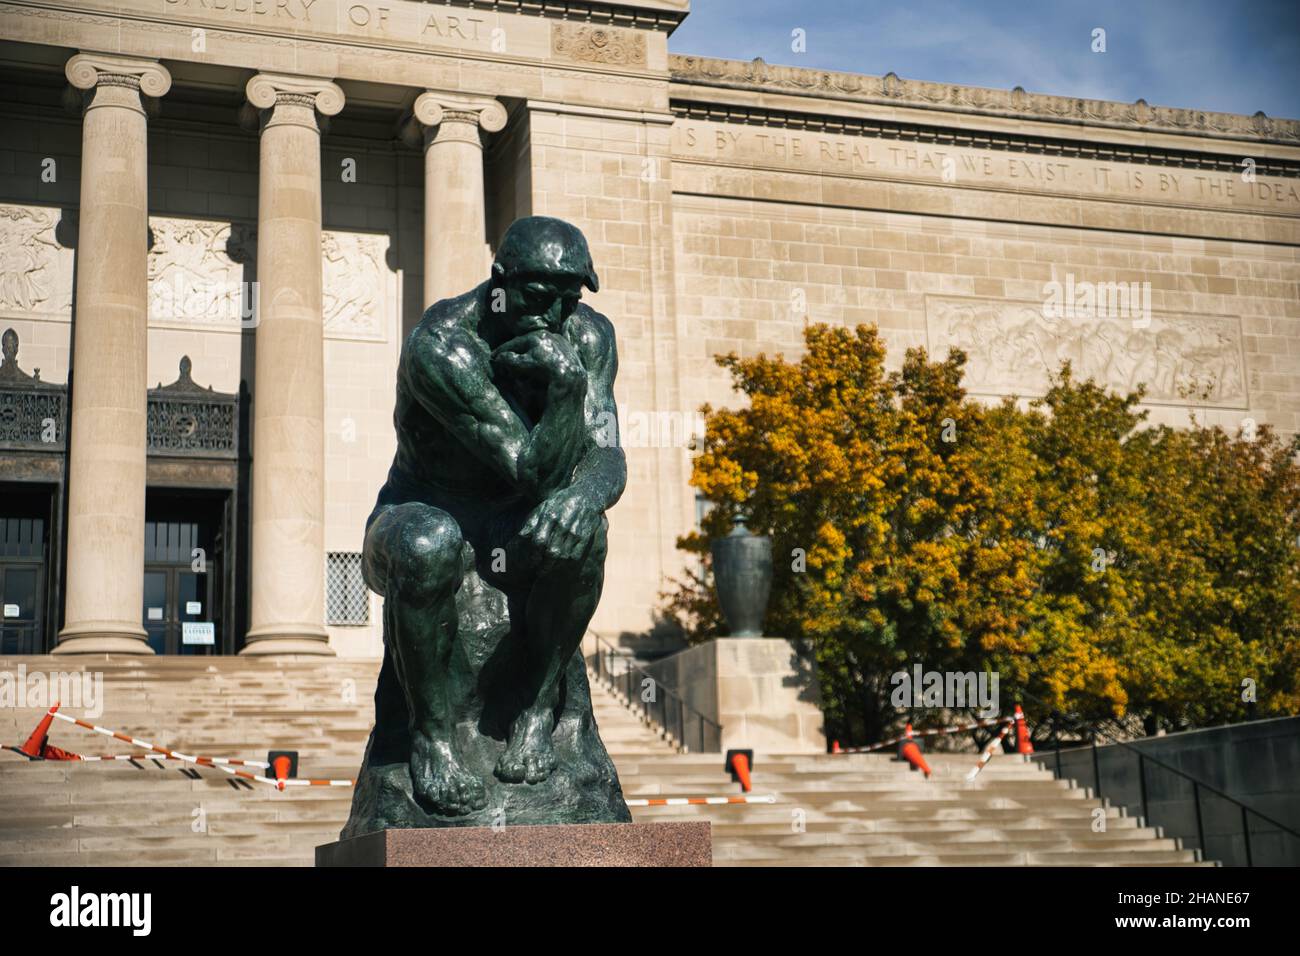 KANSAS CITY, UNITED STATES - Nov 07, 2021: The Thinker, a bronze sculpture by Auguste Rodin at Nelson Atkins Art Museum Stock Photo